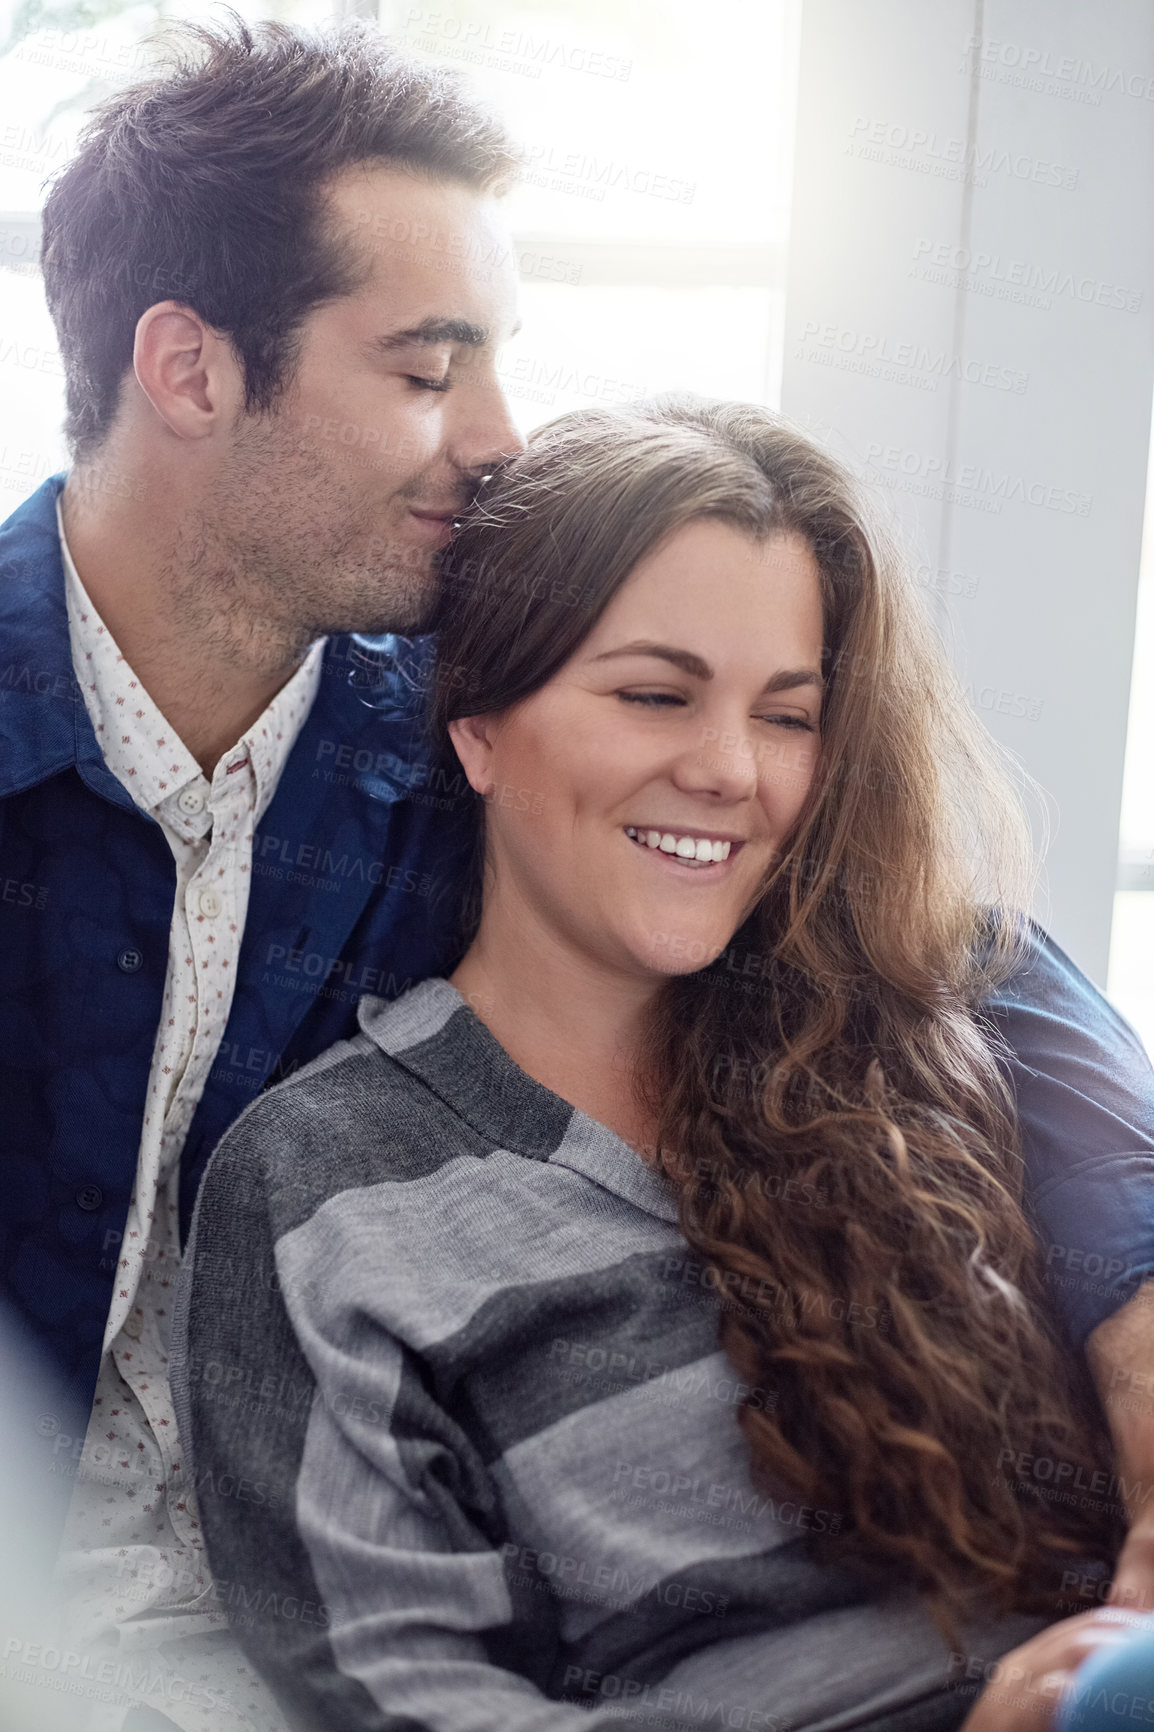 Buy stock photo Shot of a young man smelling his girlfriend's hair while they relax at home together